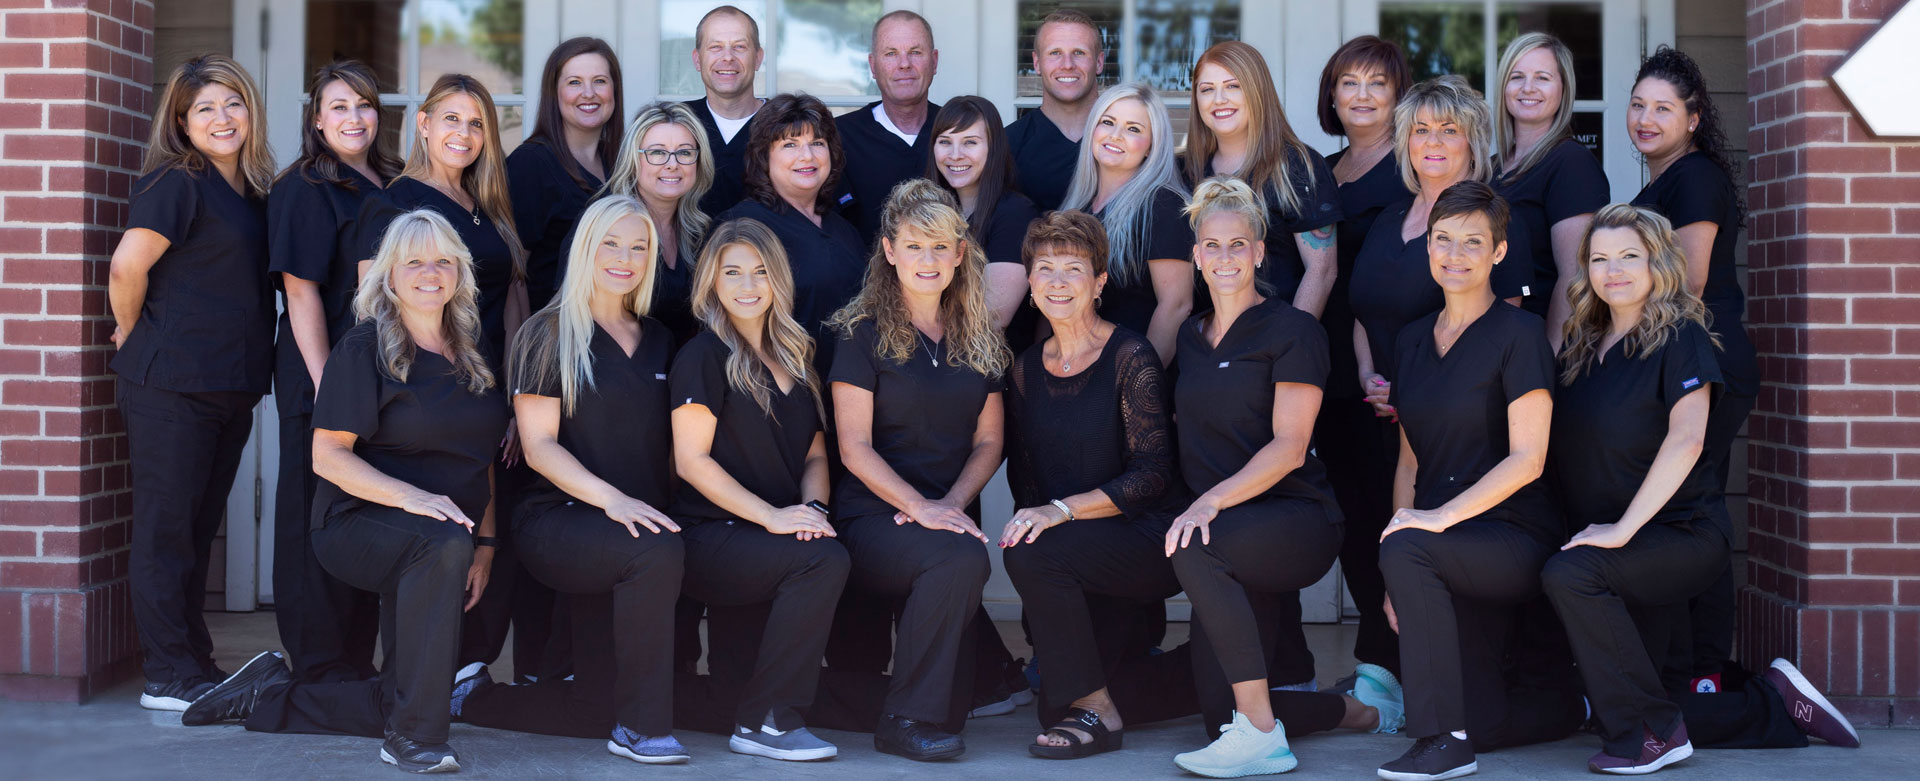 Zwahlen and Marshall Family Dentistry | Snoring Appliances, CEREC and Emergency Treatment